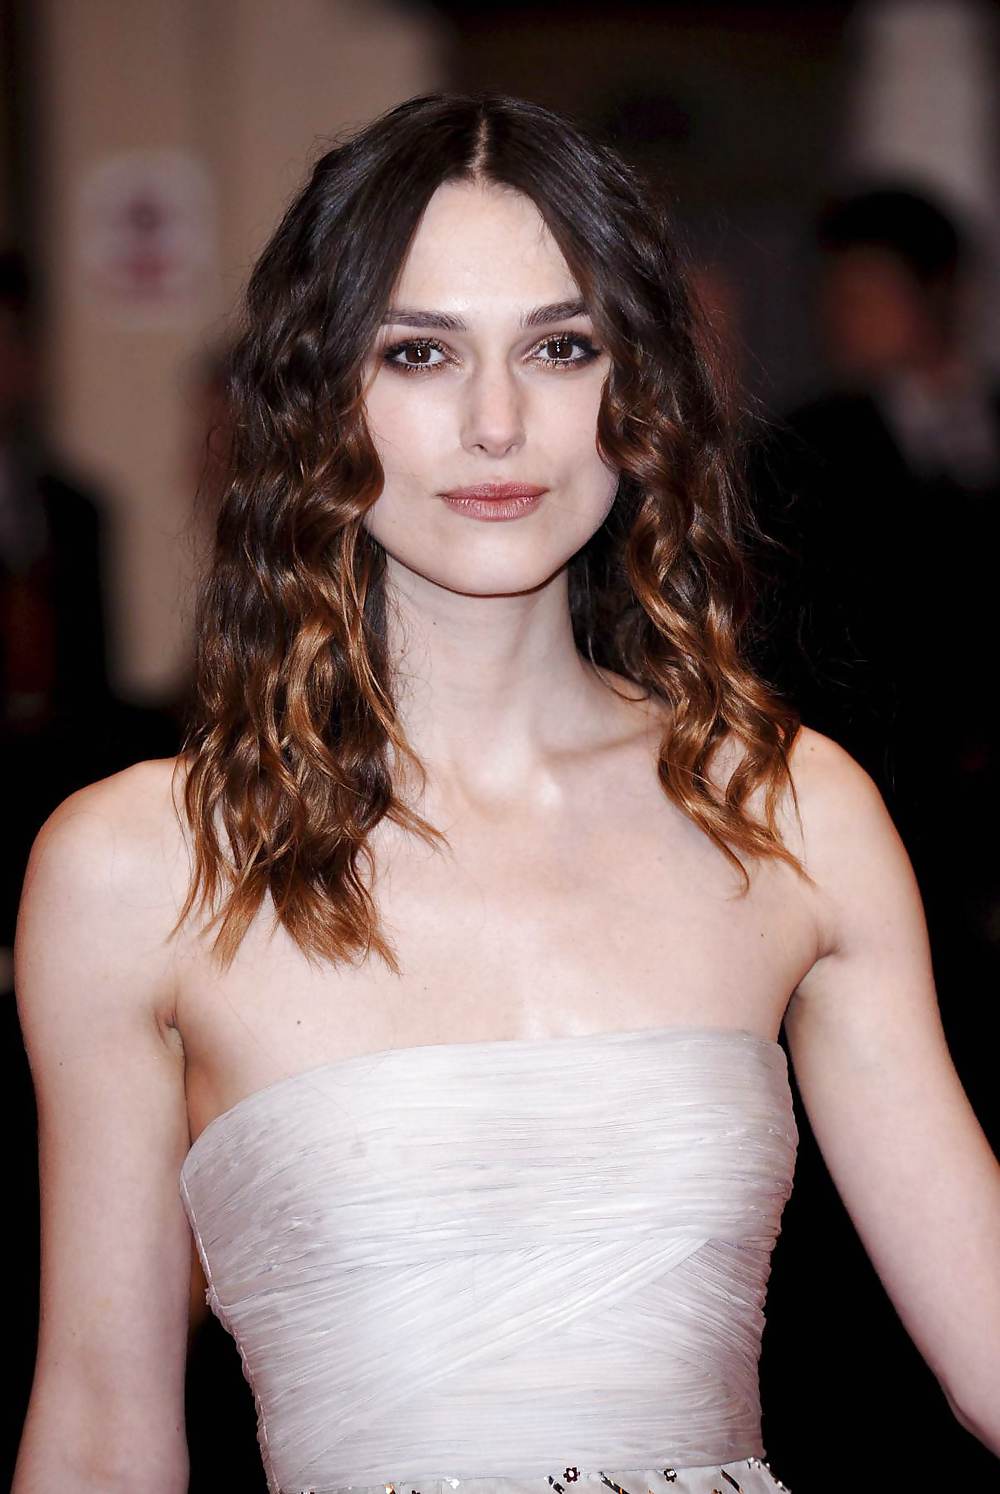 Keira Knightley The Royal Lady of England #35650218